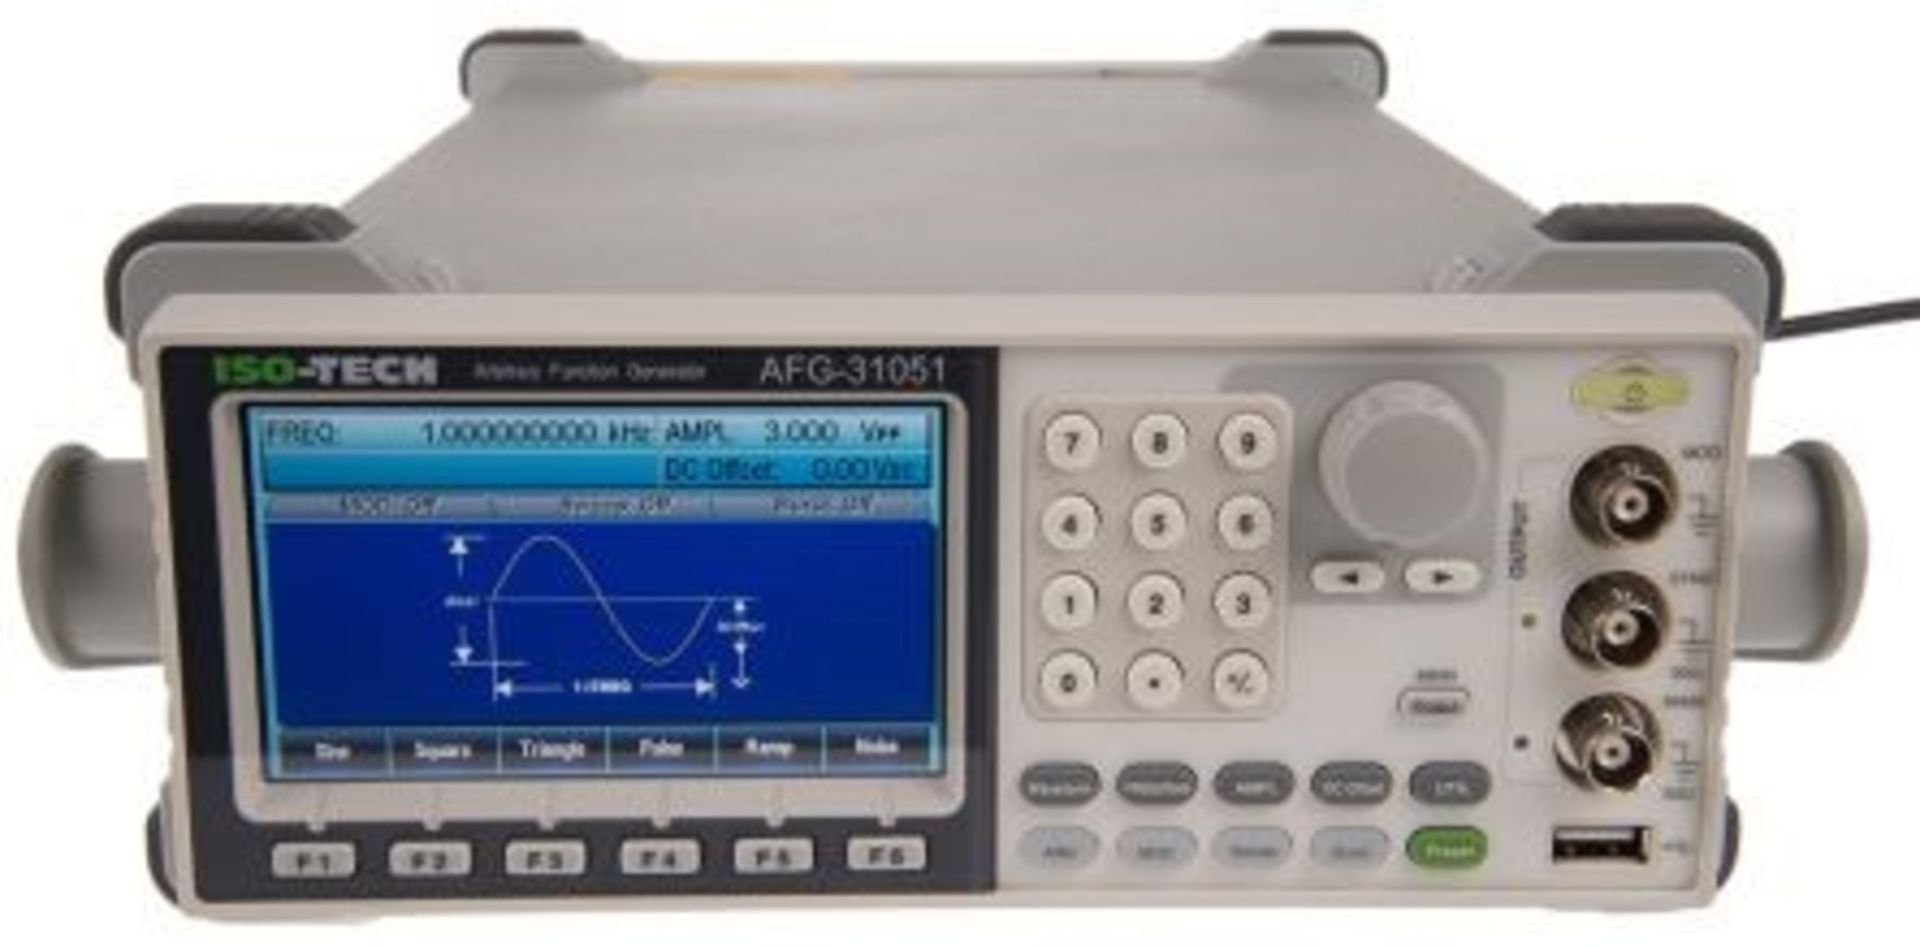 ISO-TECH AFG-31051 Function Generator 50MHz - Image 2 of 3